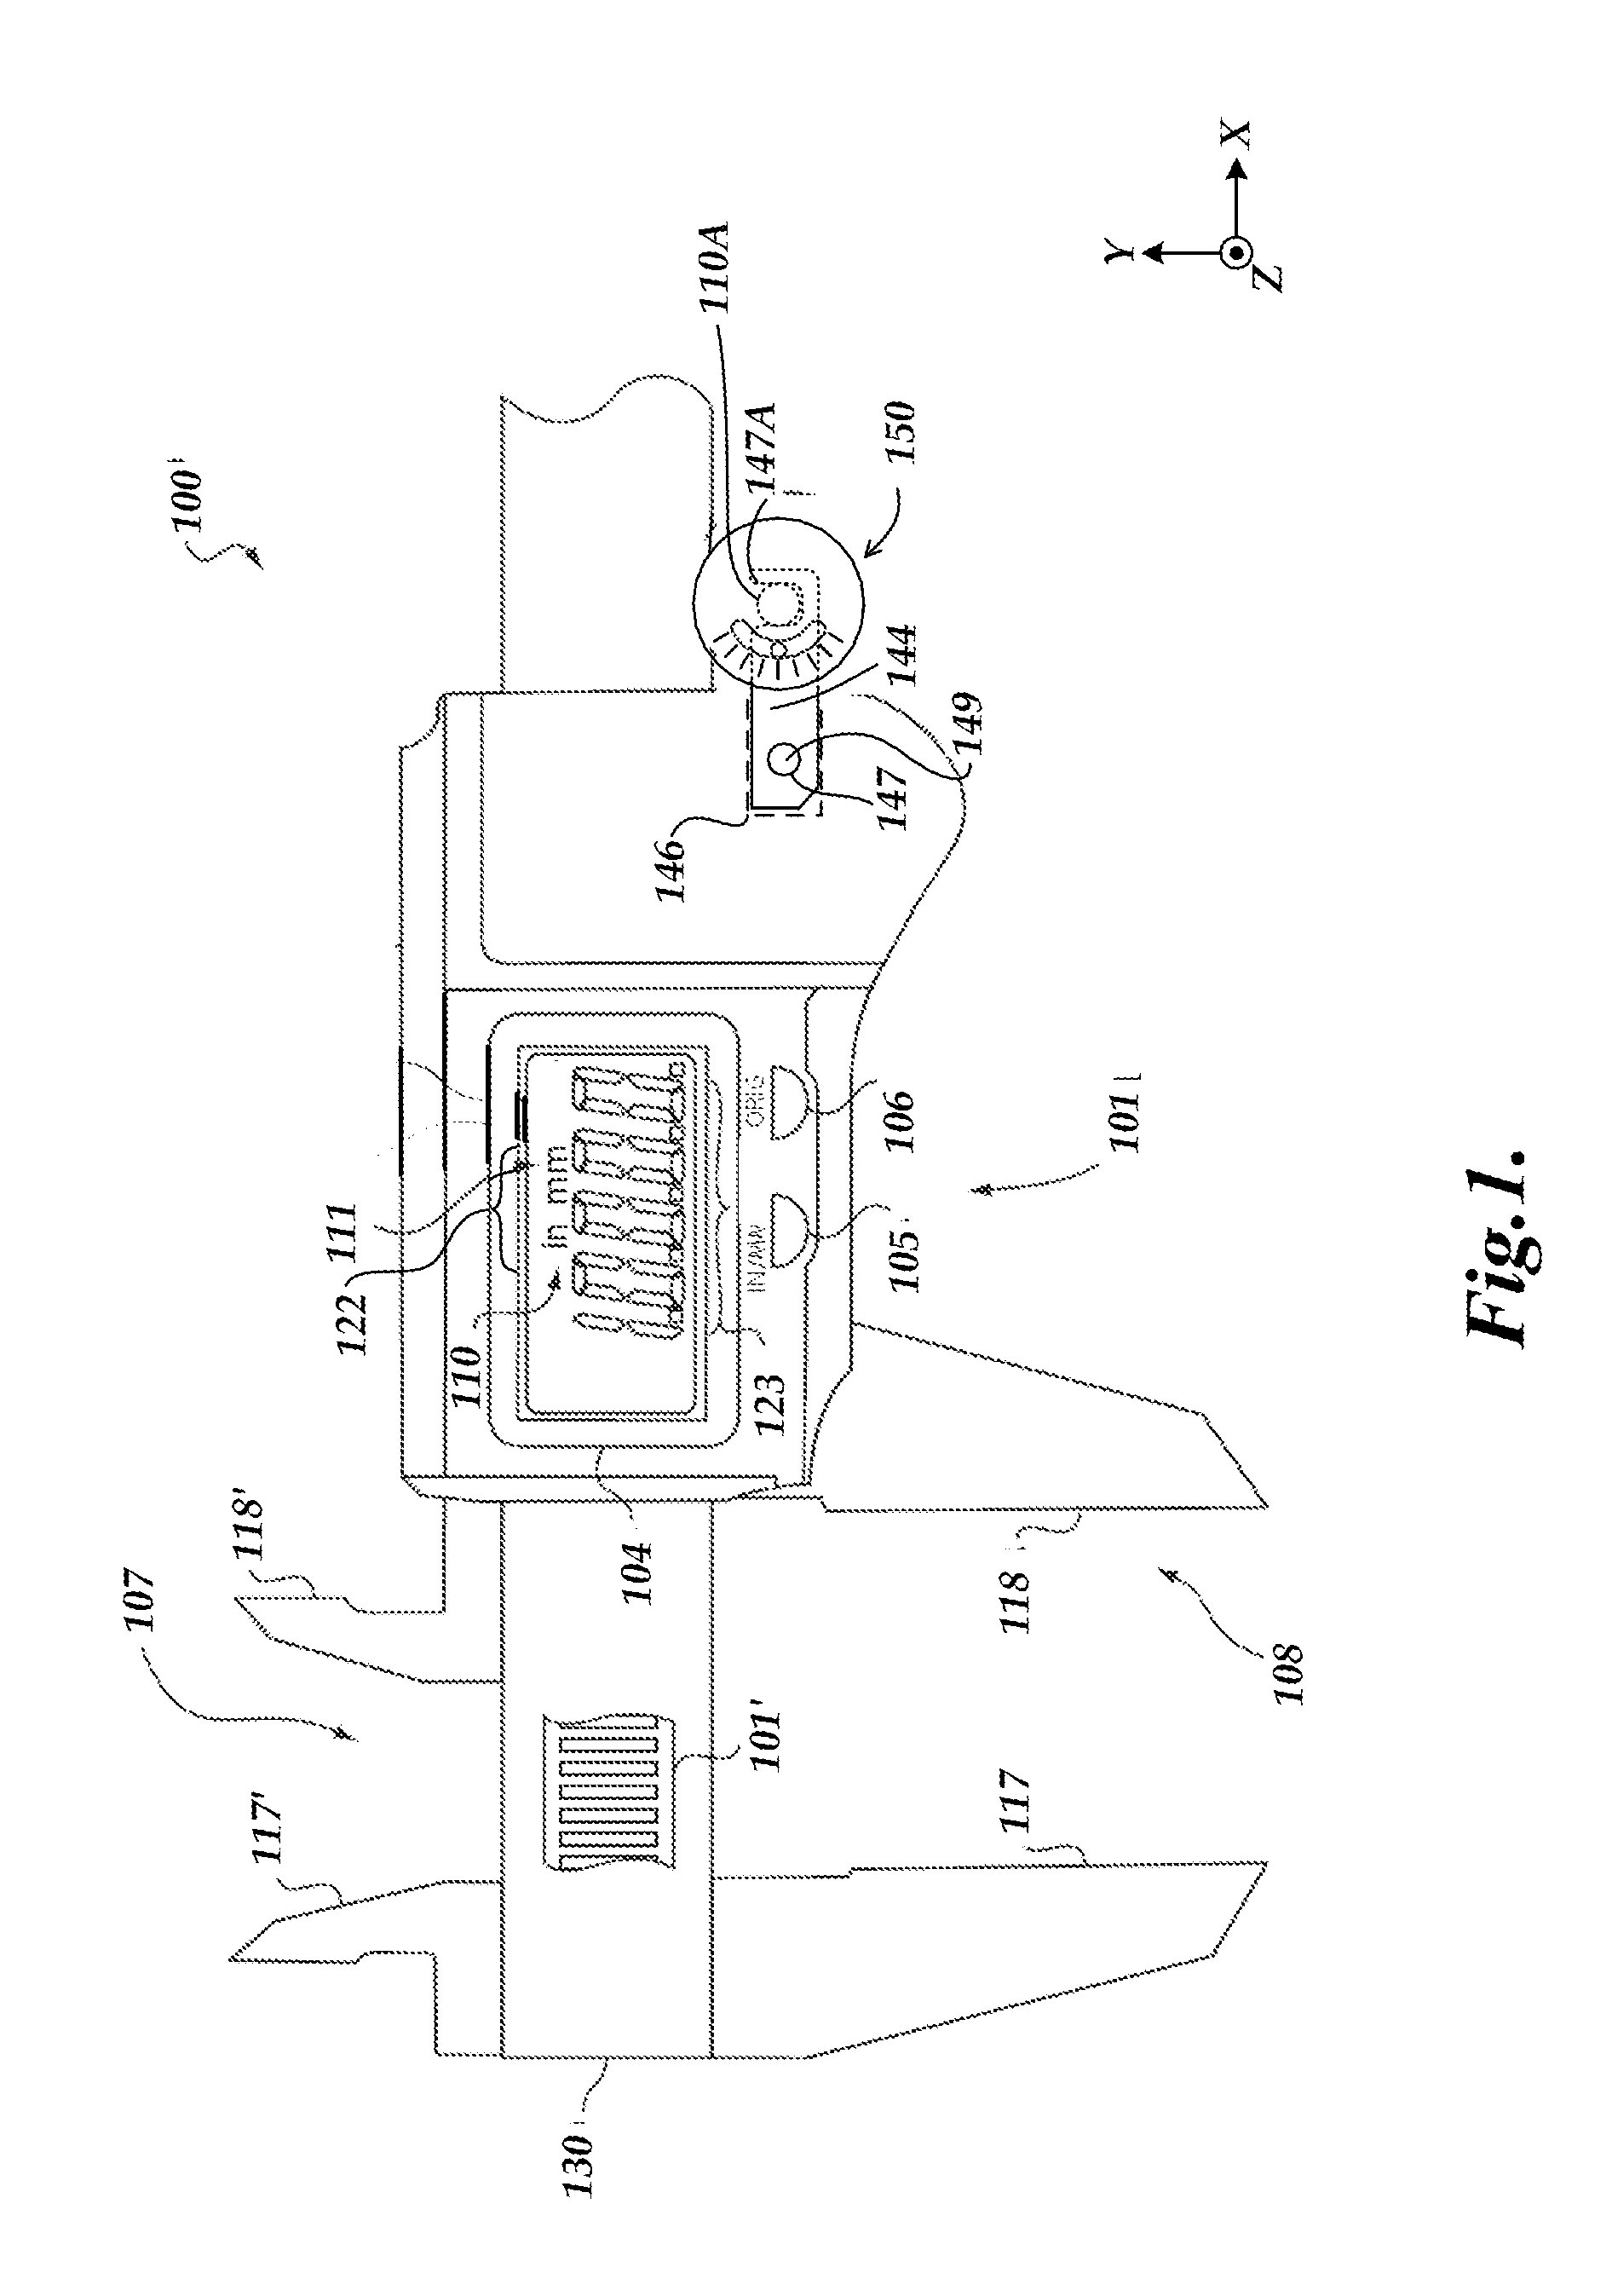 Wheel assembly for moving caliper jaw with repeatable force